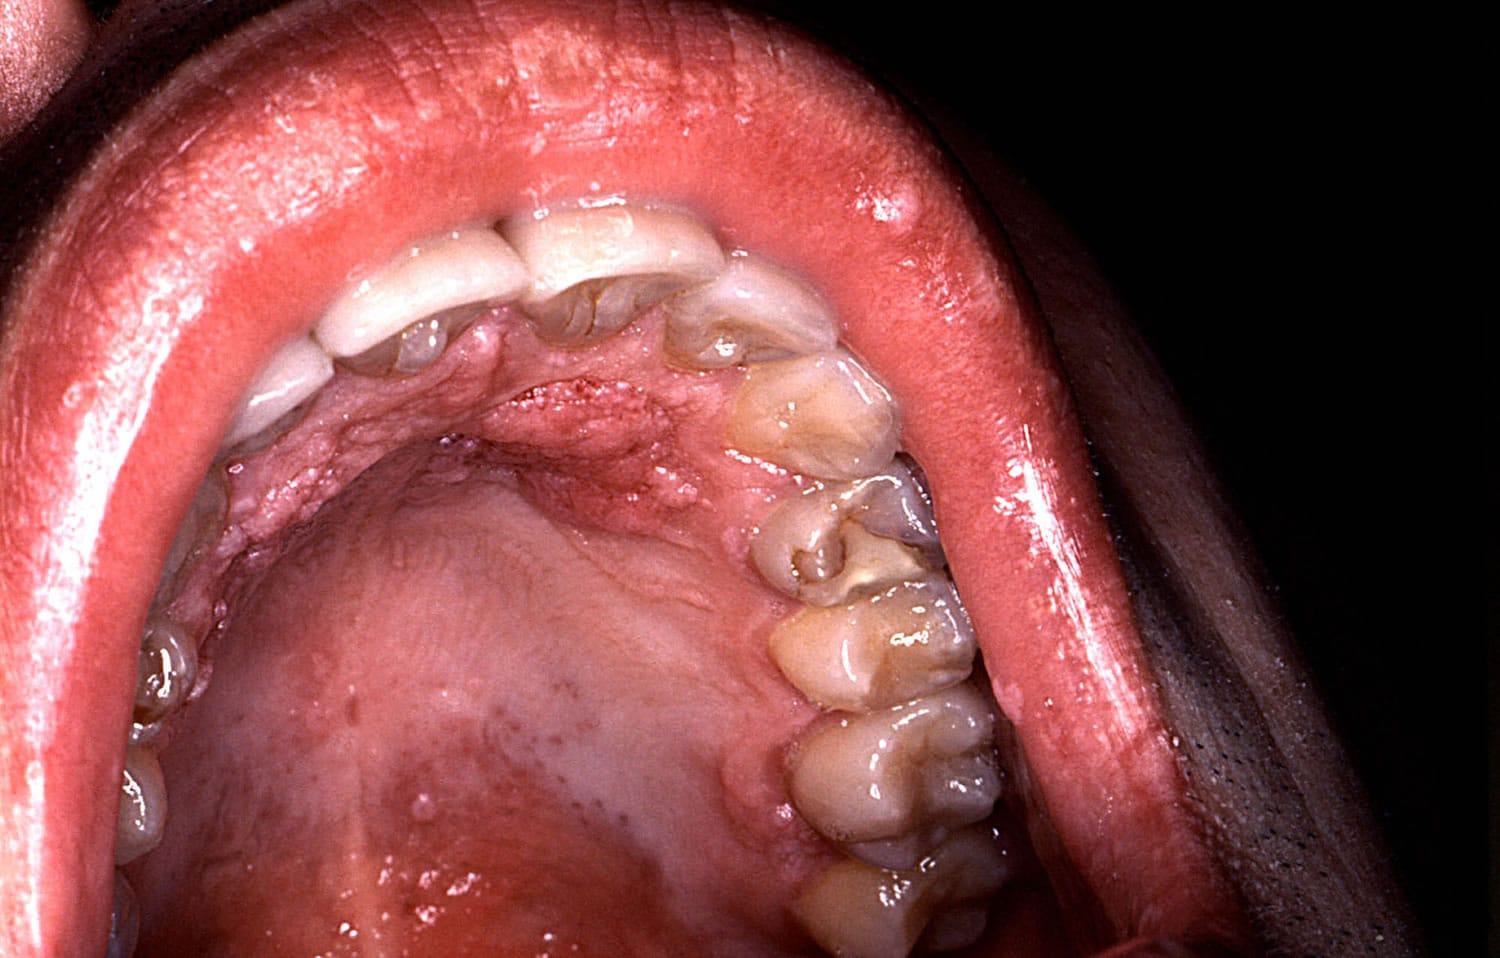 These warts were caused by the human papillomavirus.